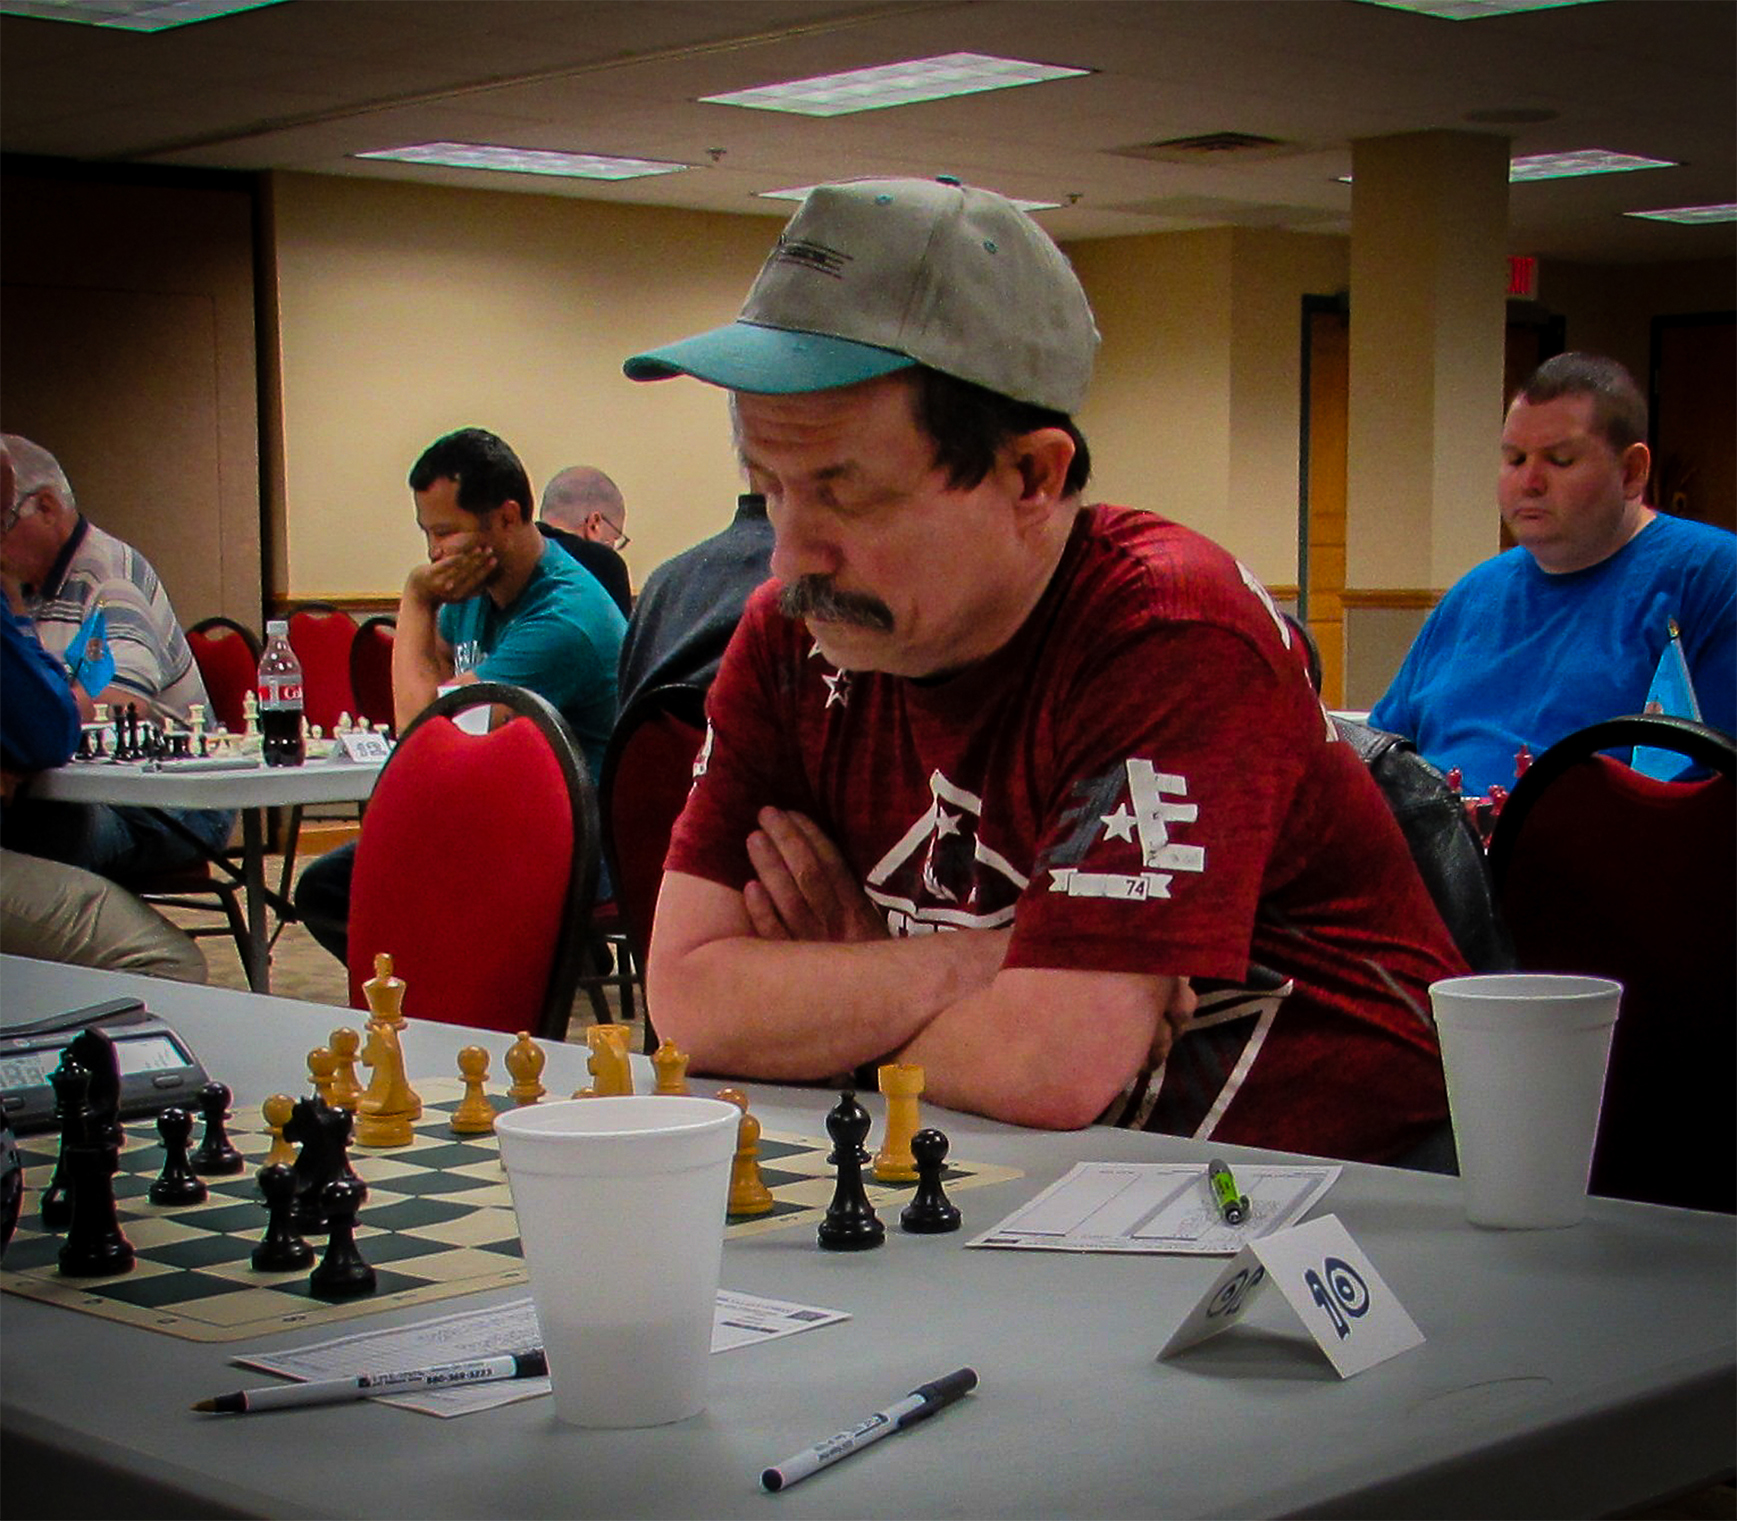 In his sevententh RRSO, Bruce Wells played a close match against a determined Texan.  He won the Oklahoma City Championship in 1977.  He is ranked in the 82nd Percentile for all USA chess players and ranked Number 70 in Oklahoma.  Photo by Mike Tubbs.